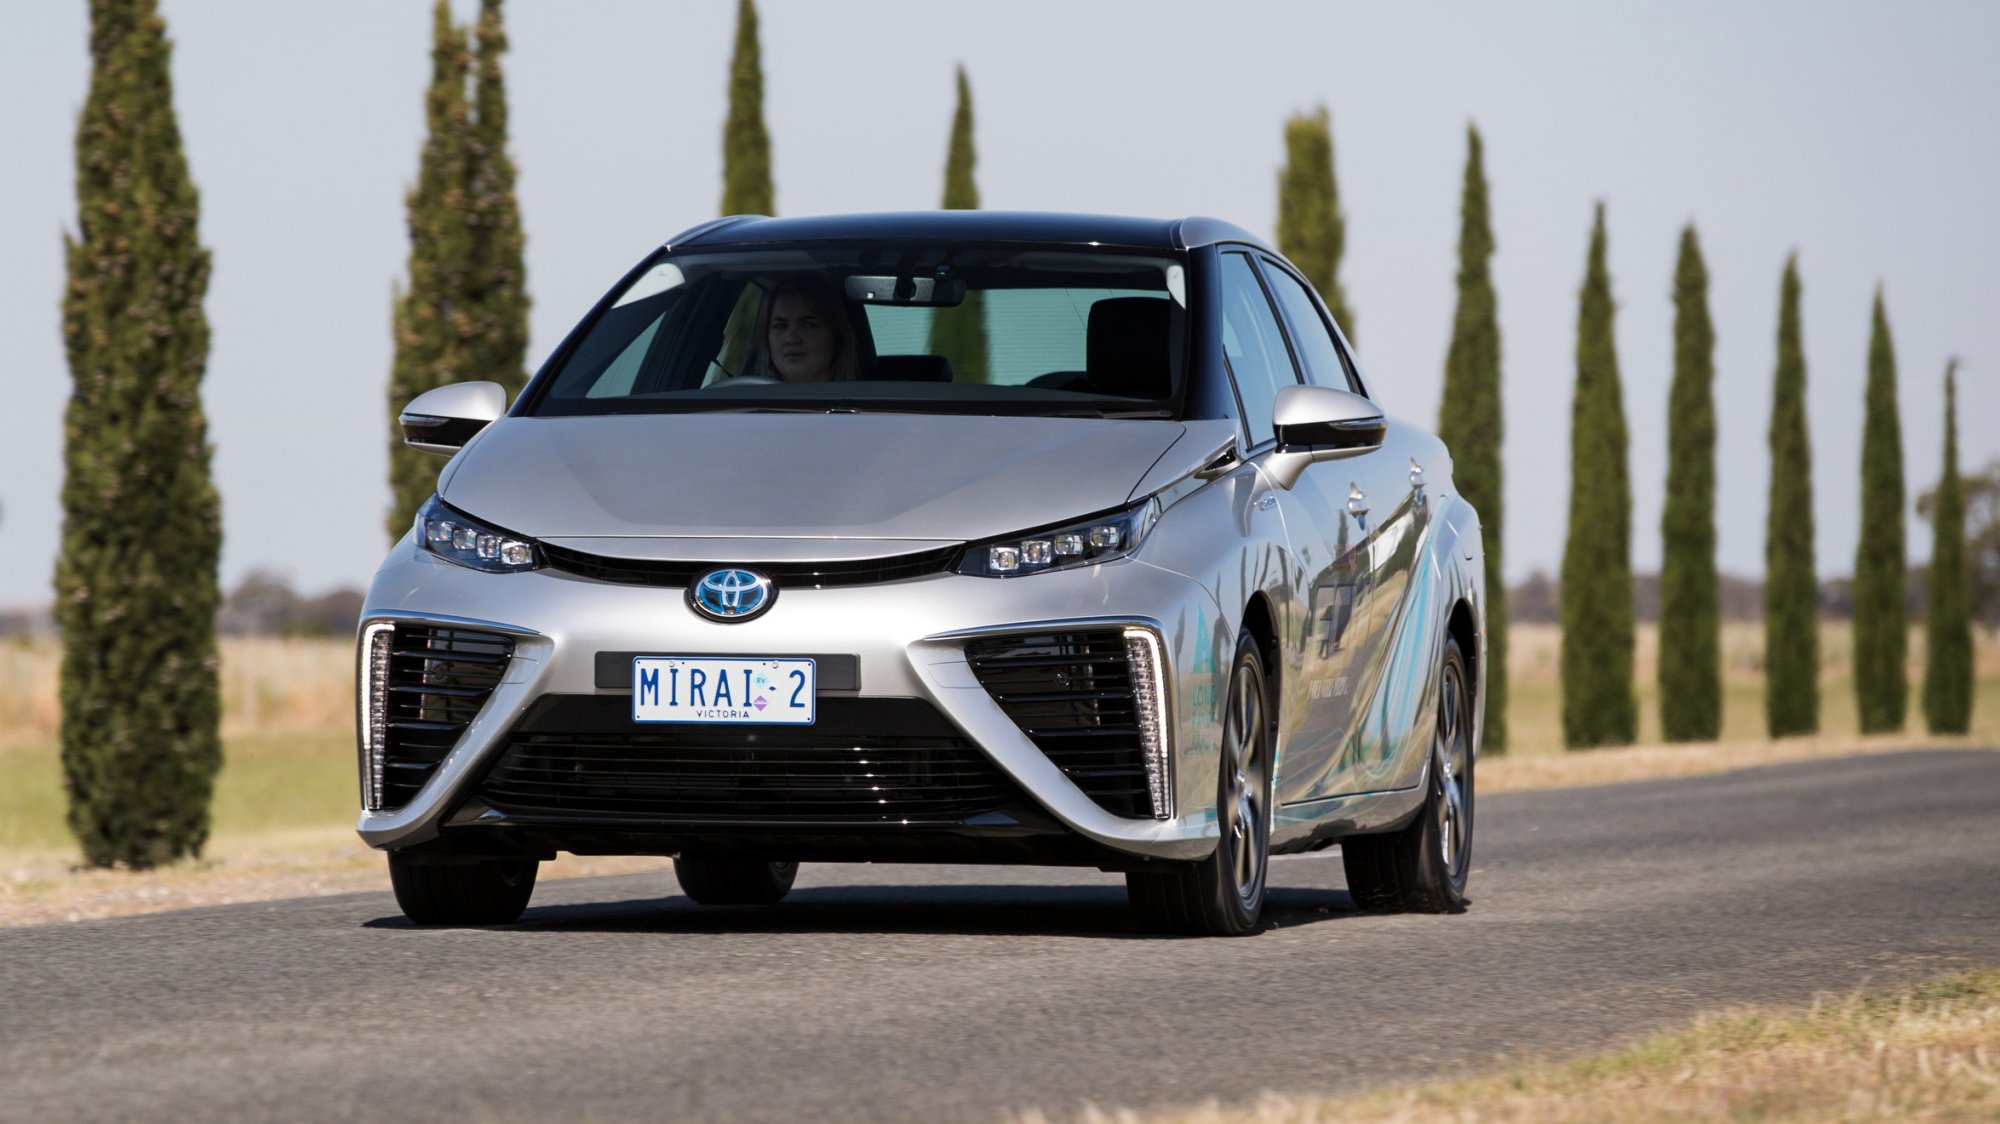 News - Toyota’s 2022 EV Will Use Solid-State Batteries